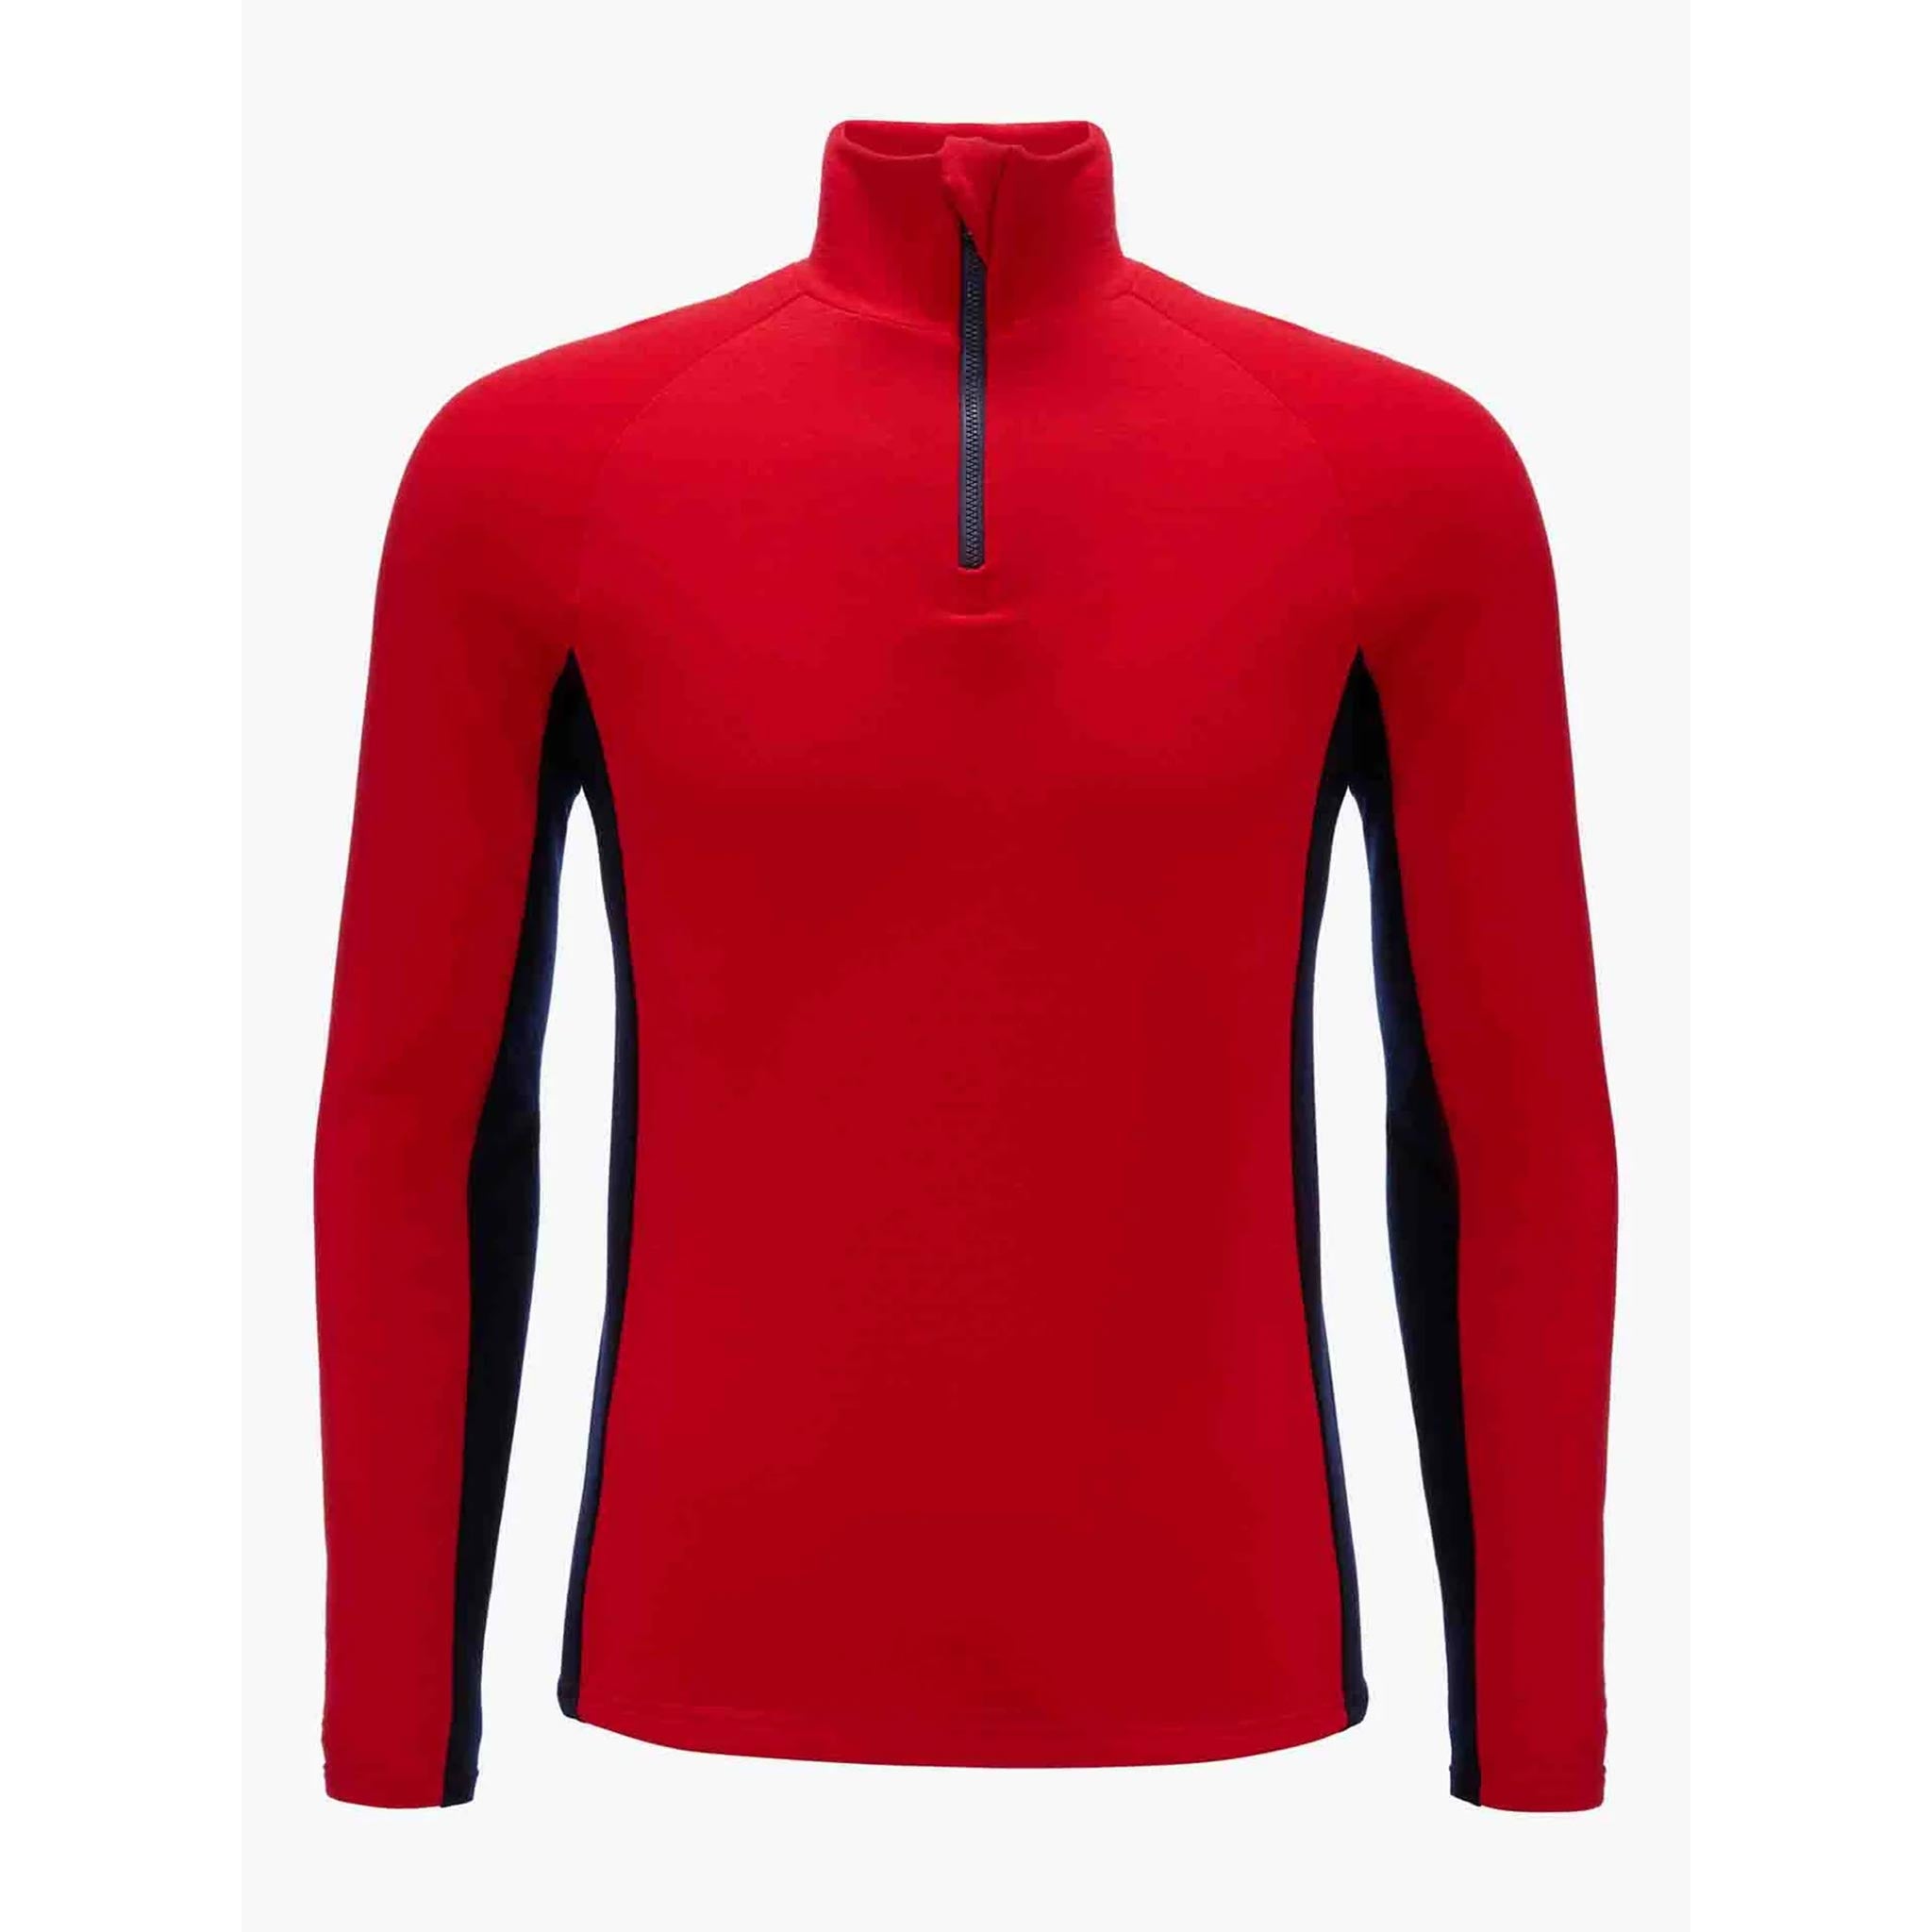 Voss Zipup Sweater in Red